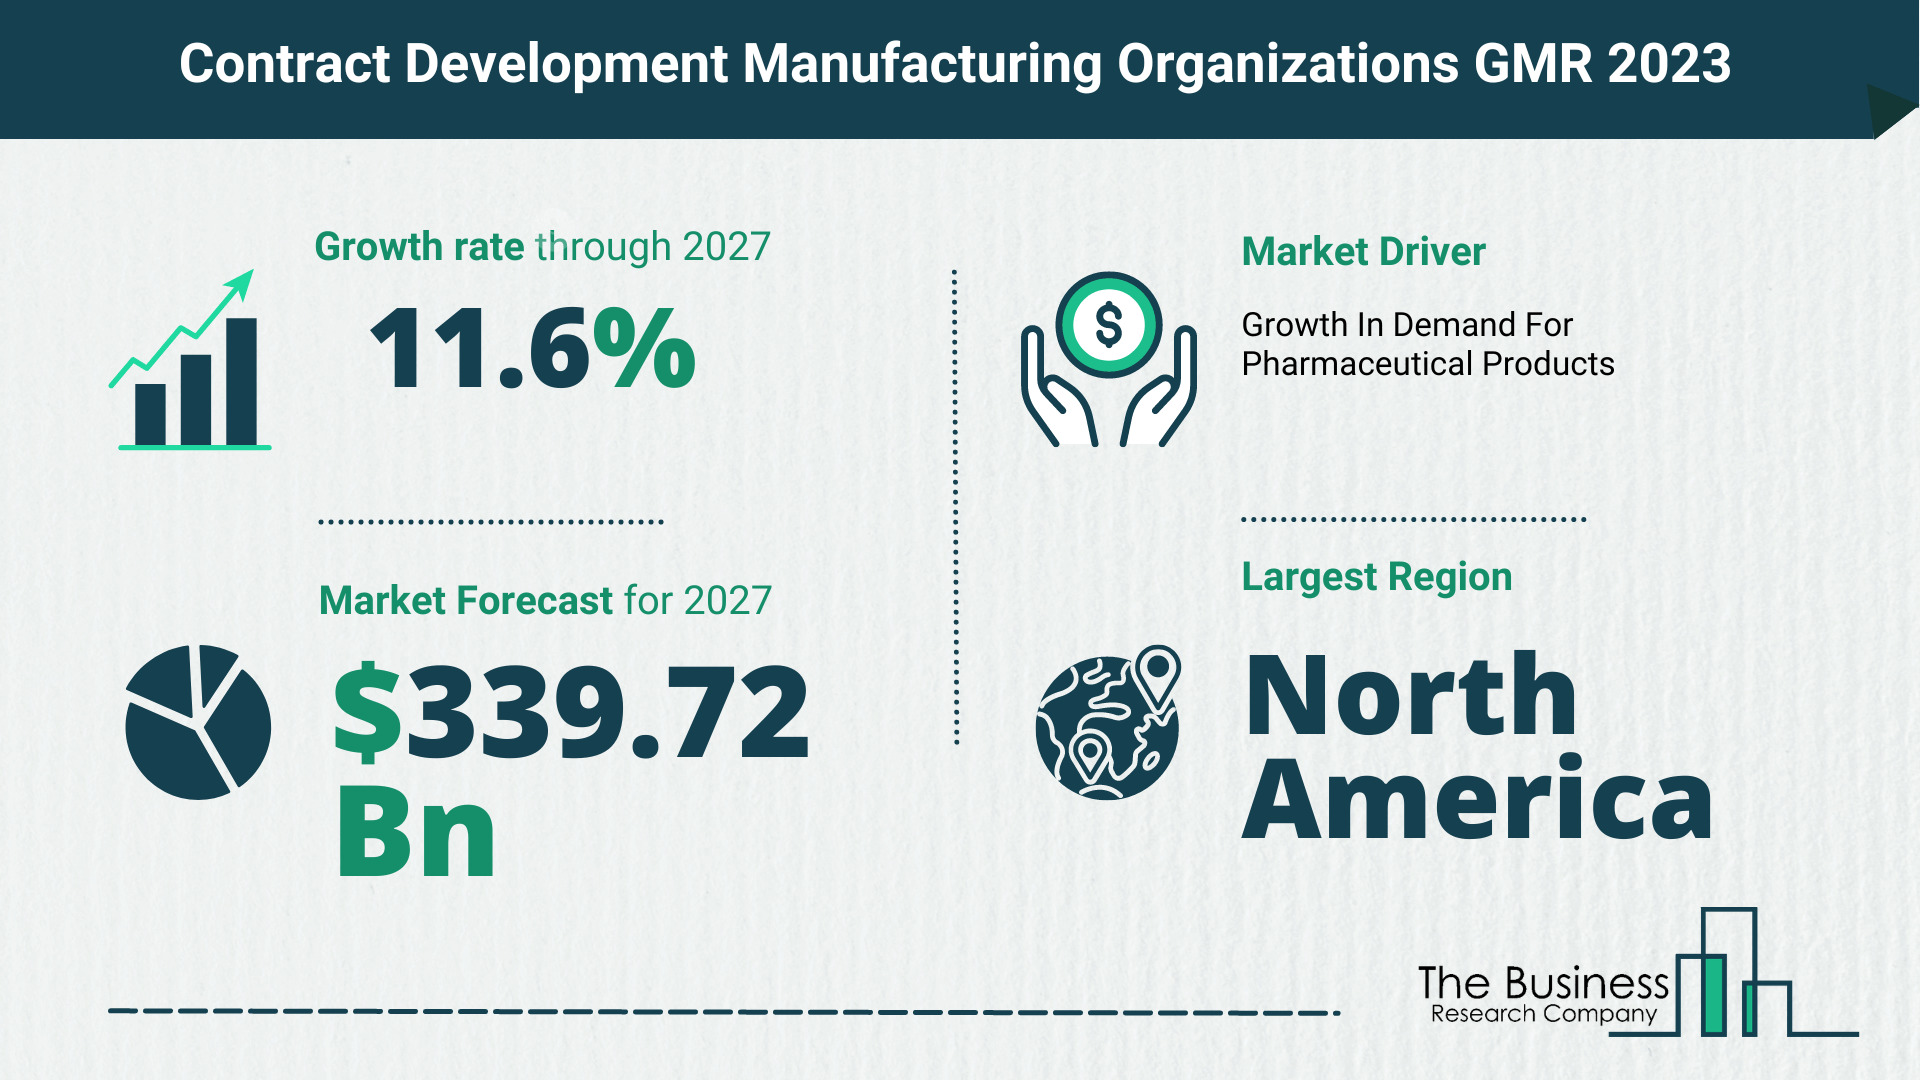 What Will The Contract Development Manufacturing Organizations Market Look Like In 2023?